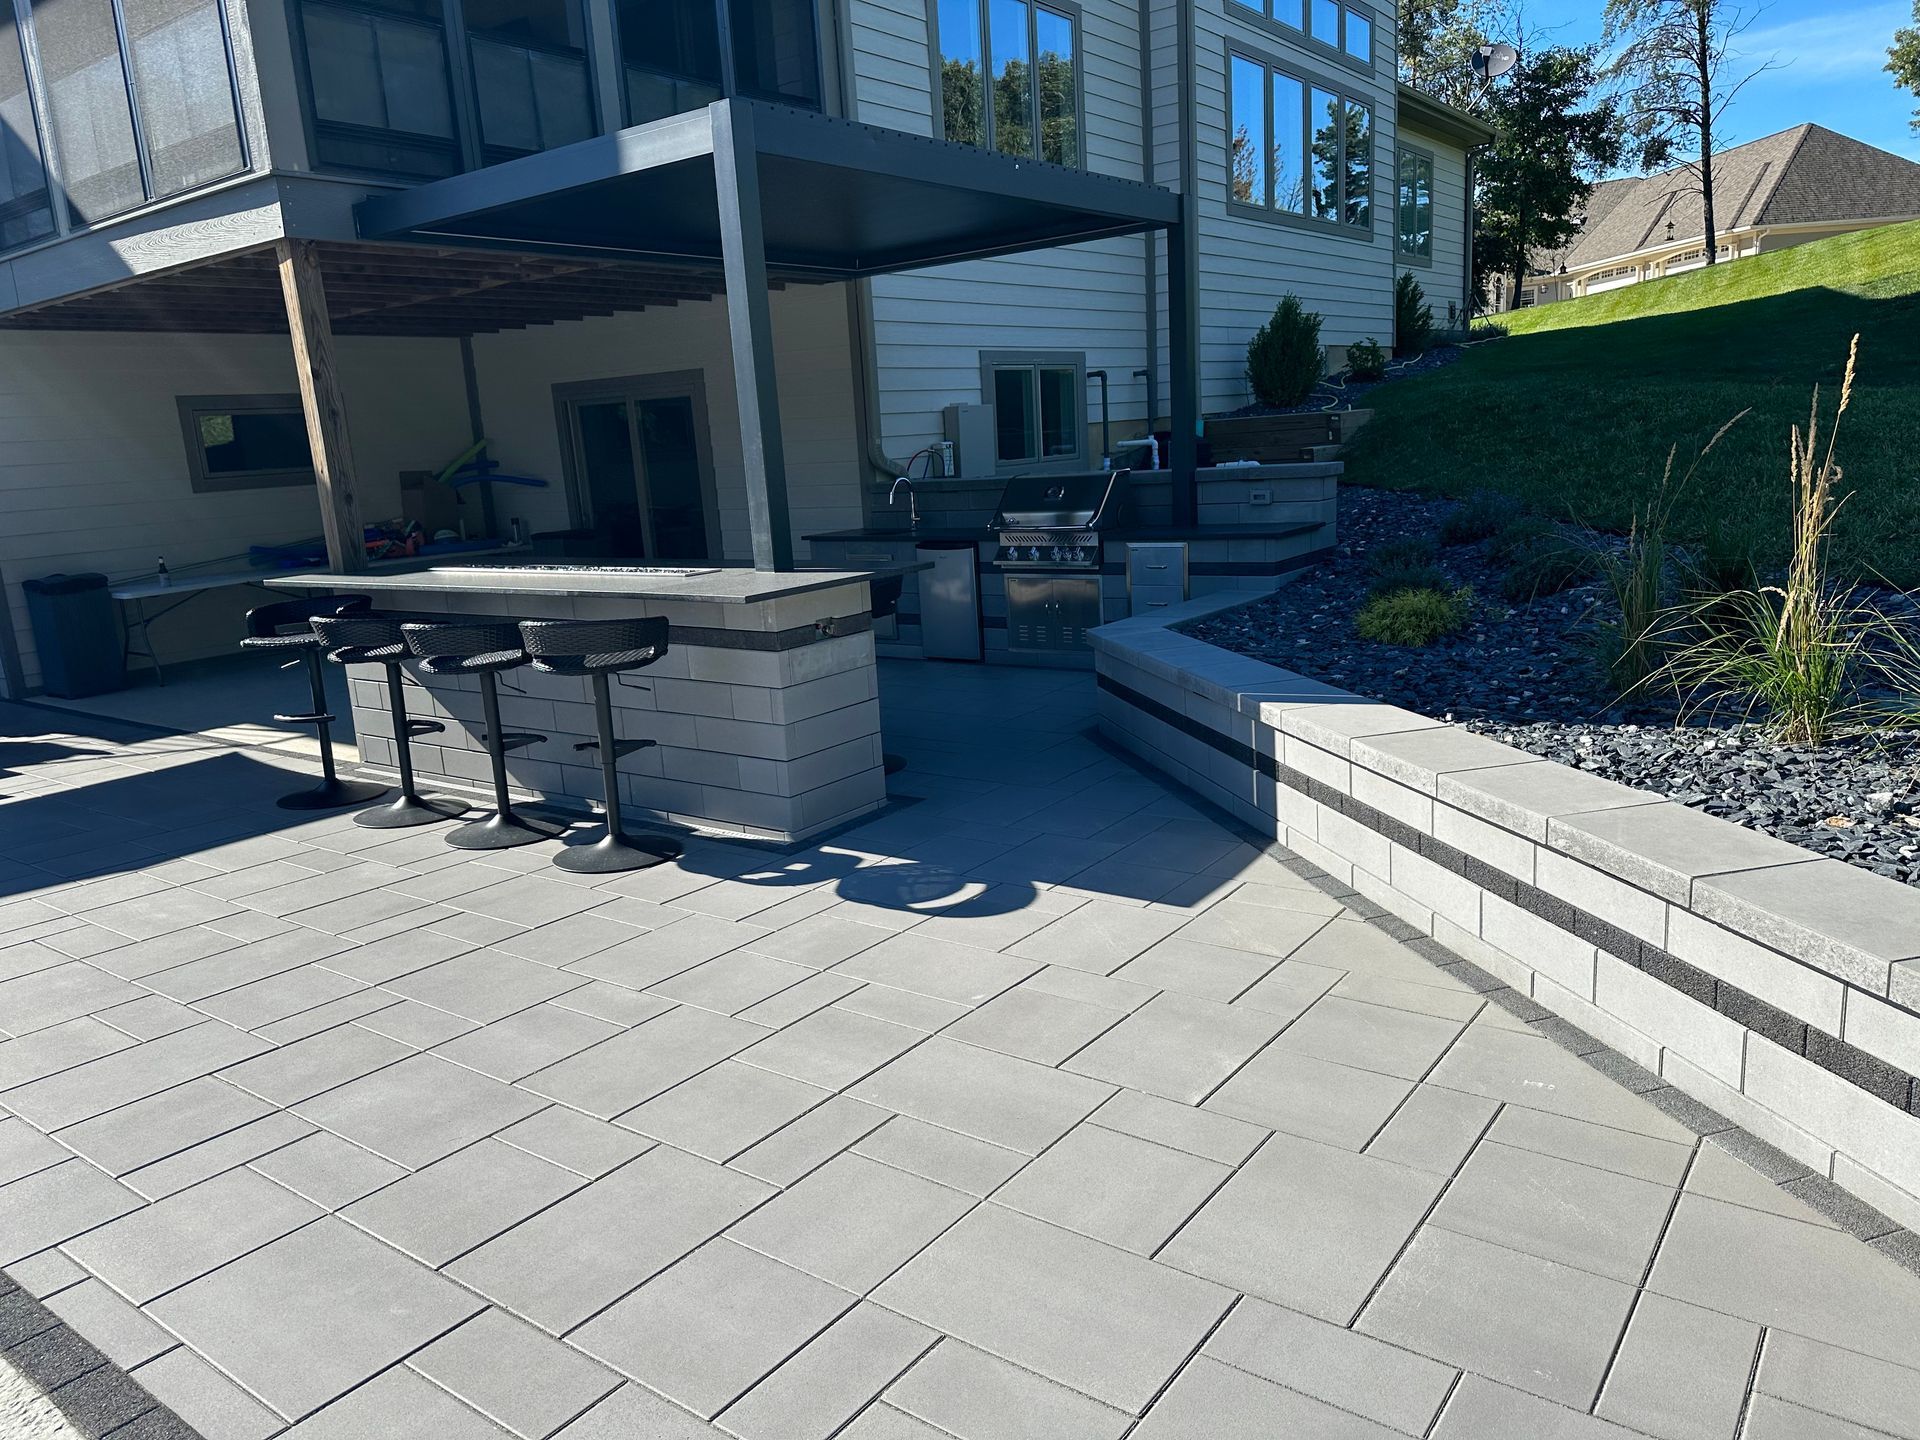 Paver Patio with outdoor kitchen